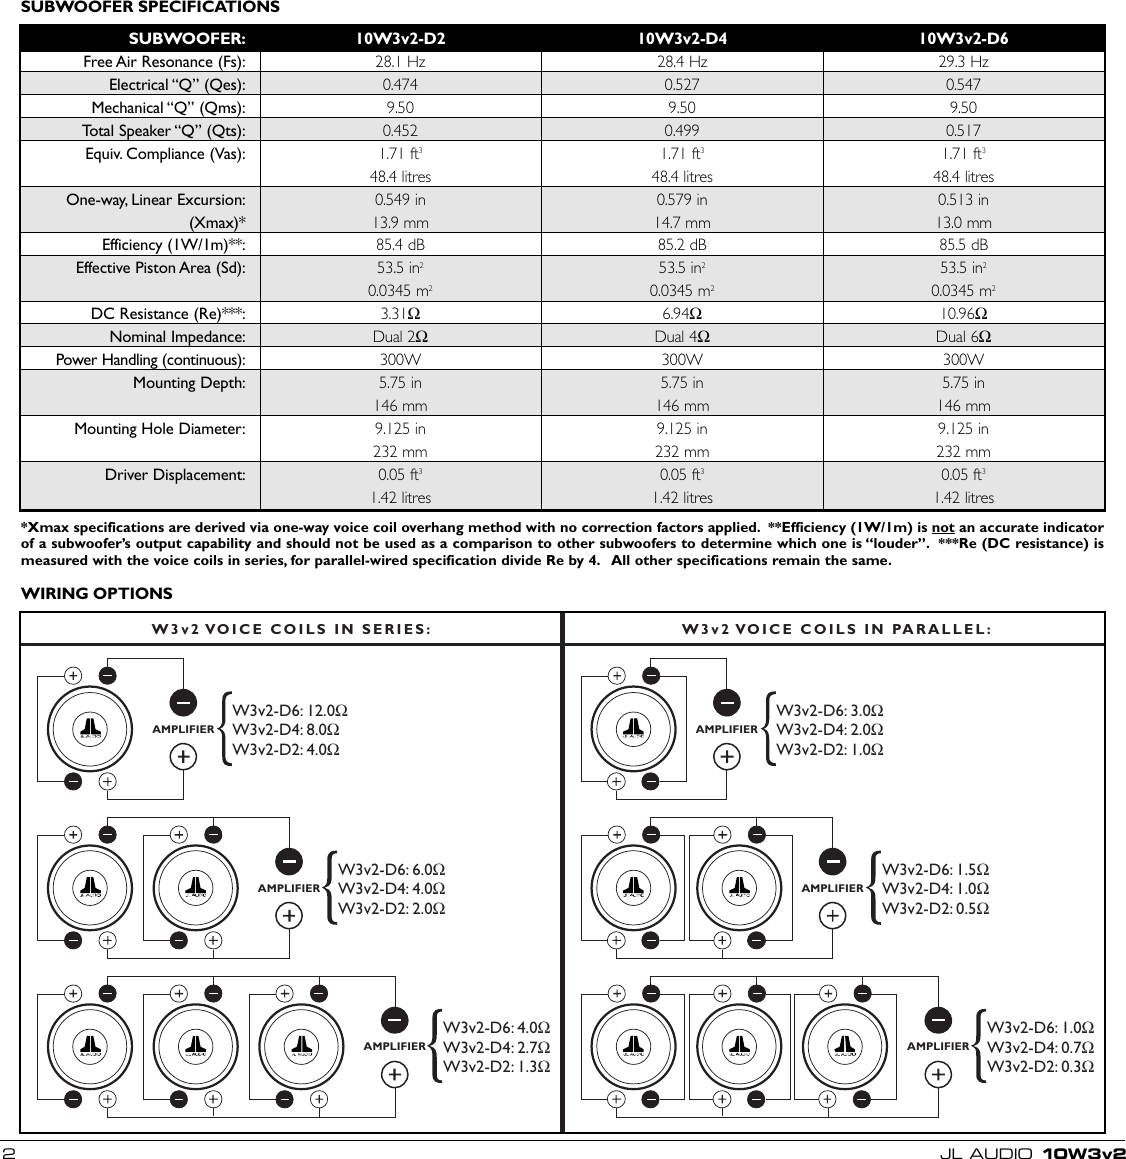 Page 2 of 4 - Jl-Audio Jl-Audio-10W3V2-Users-Manual- 10W3v2_MAN  Jl-audio-10w3v2-users-manual